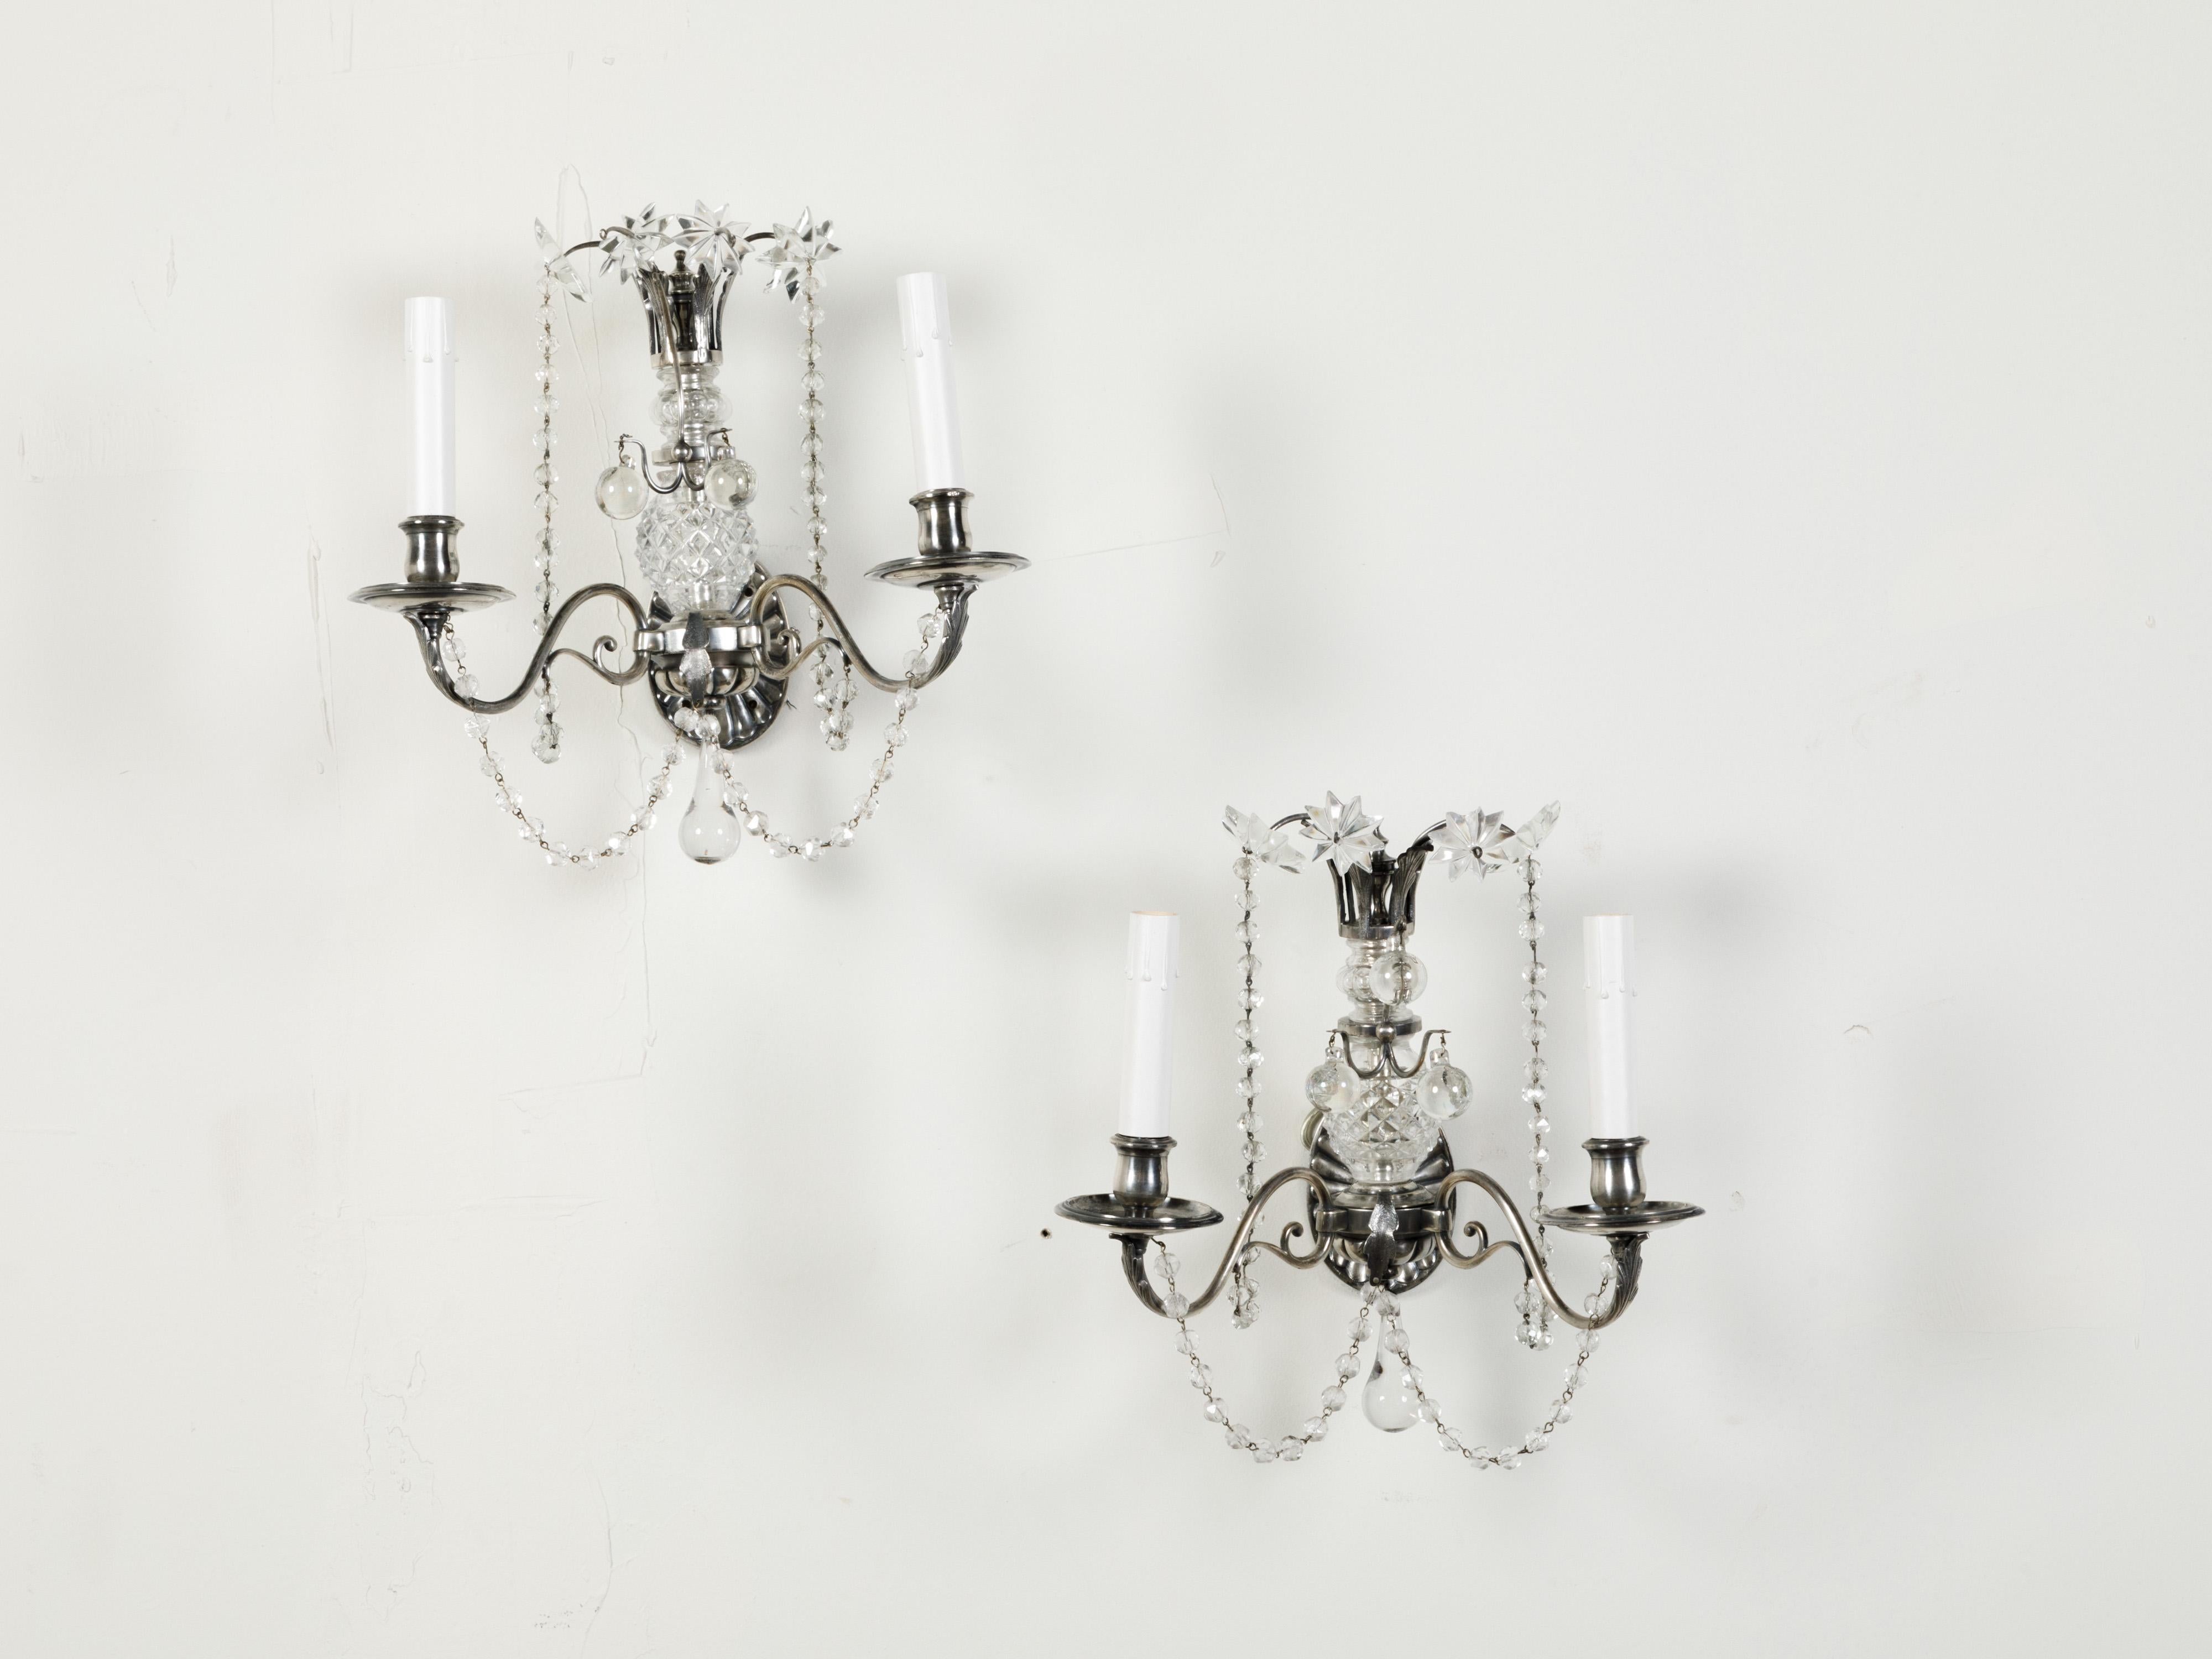 A pair of metal and crystal wall sconces from the early 20th century, with two arms, rosettes and beads. Created during the first half of the 20t century, each of this pair of crystal sconces features a radiating backplate supporting two elegant